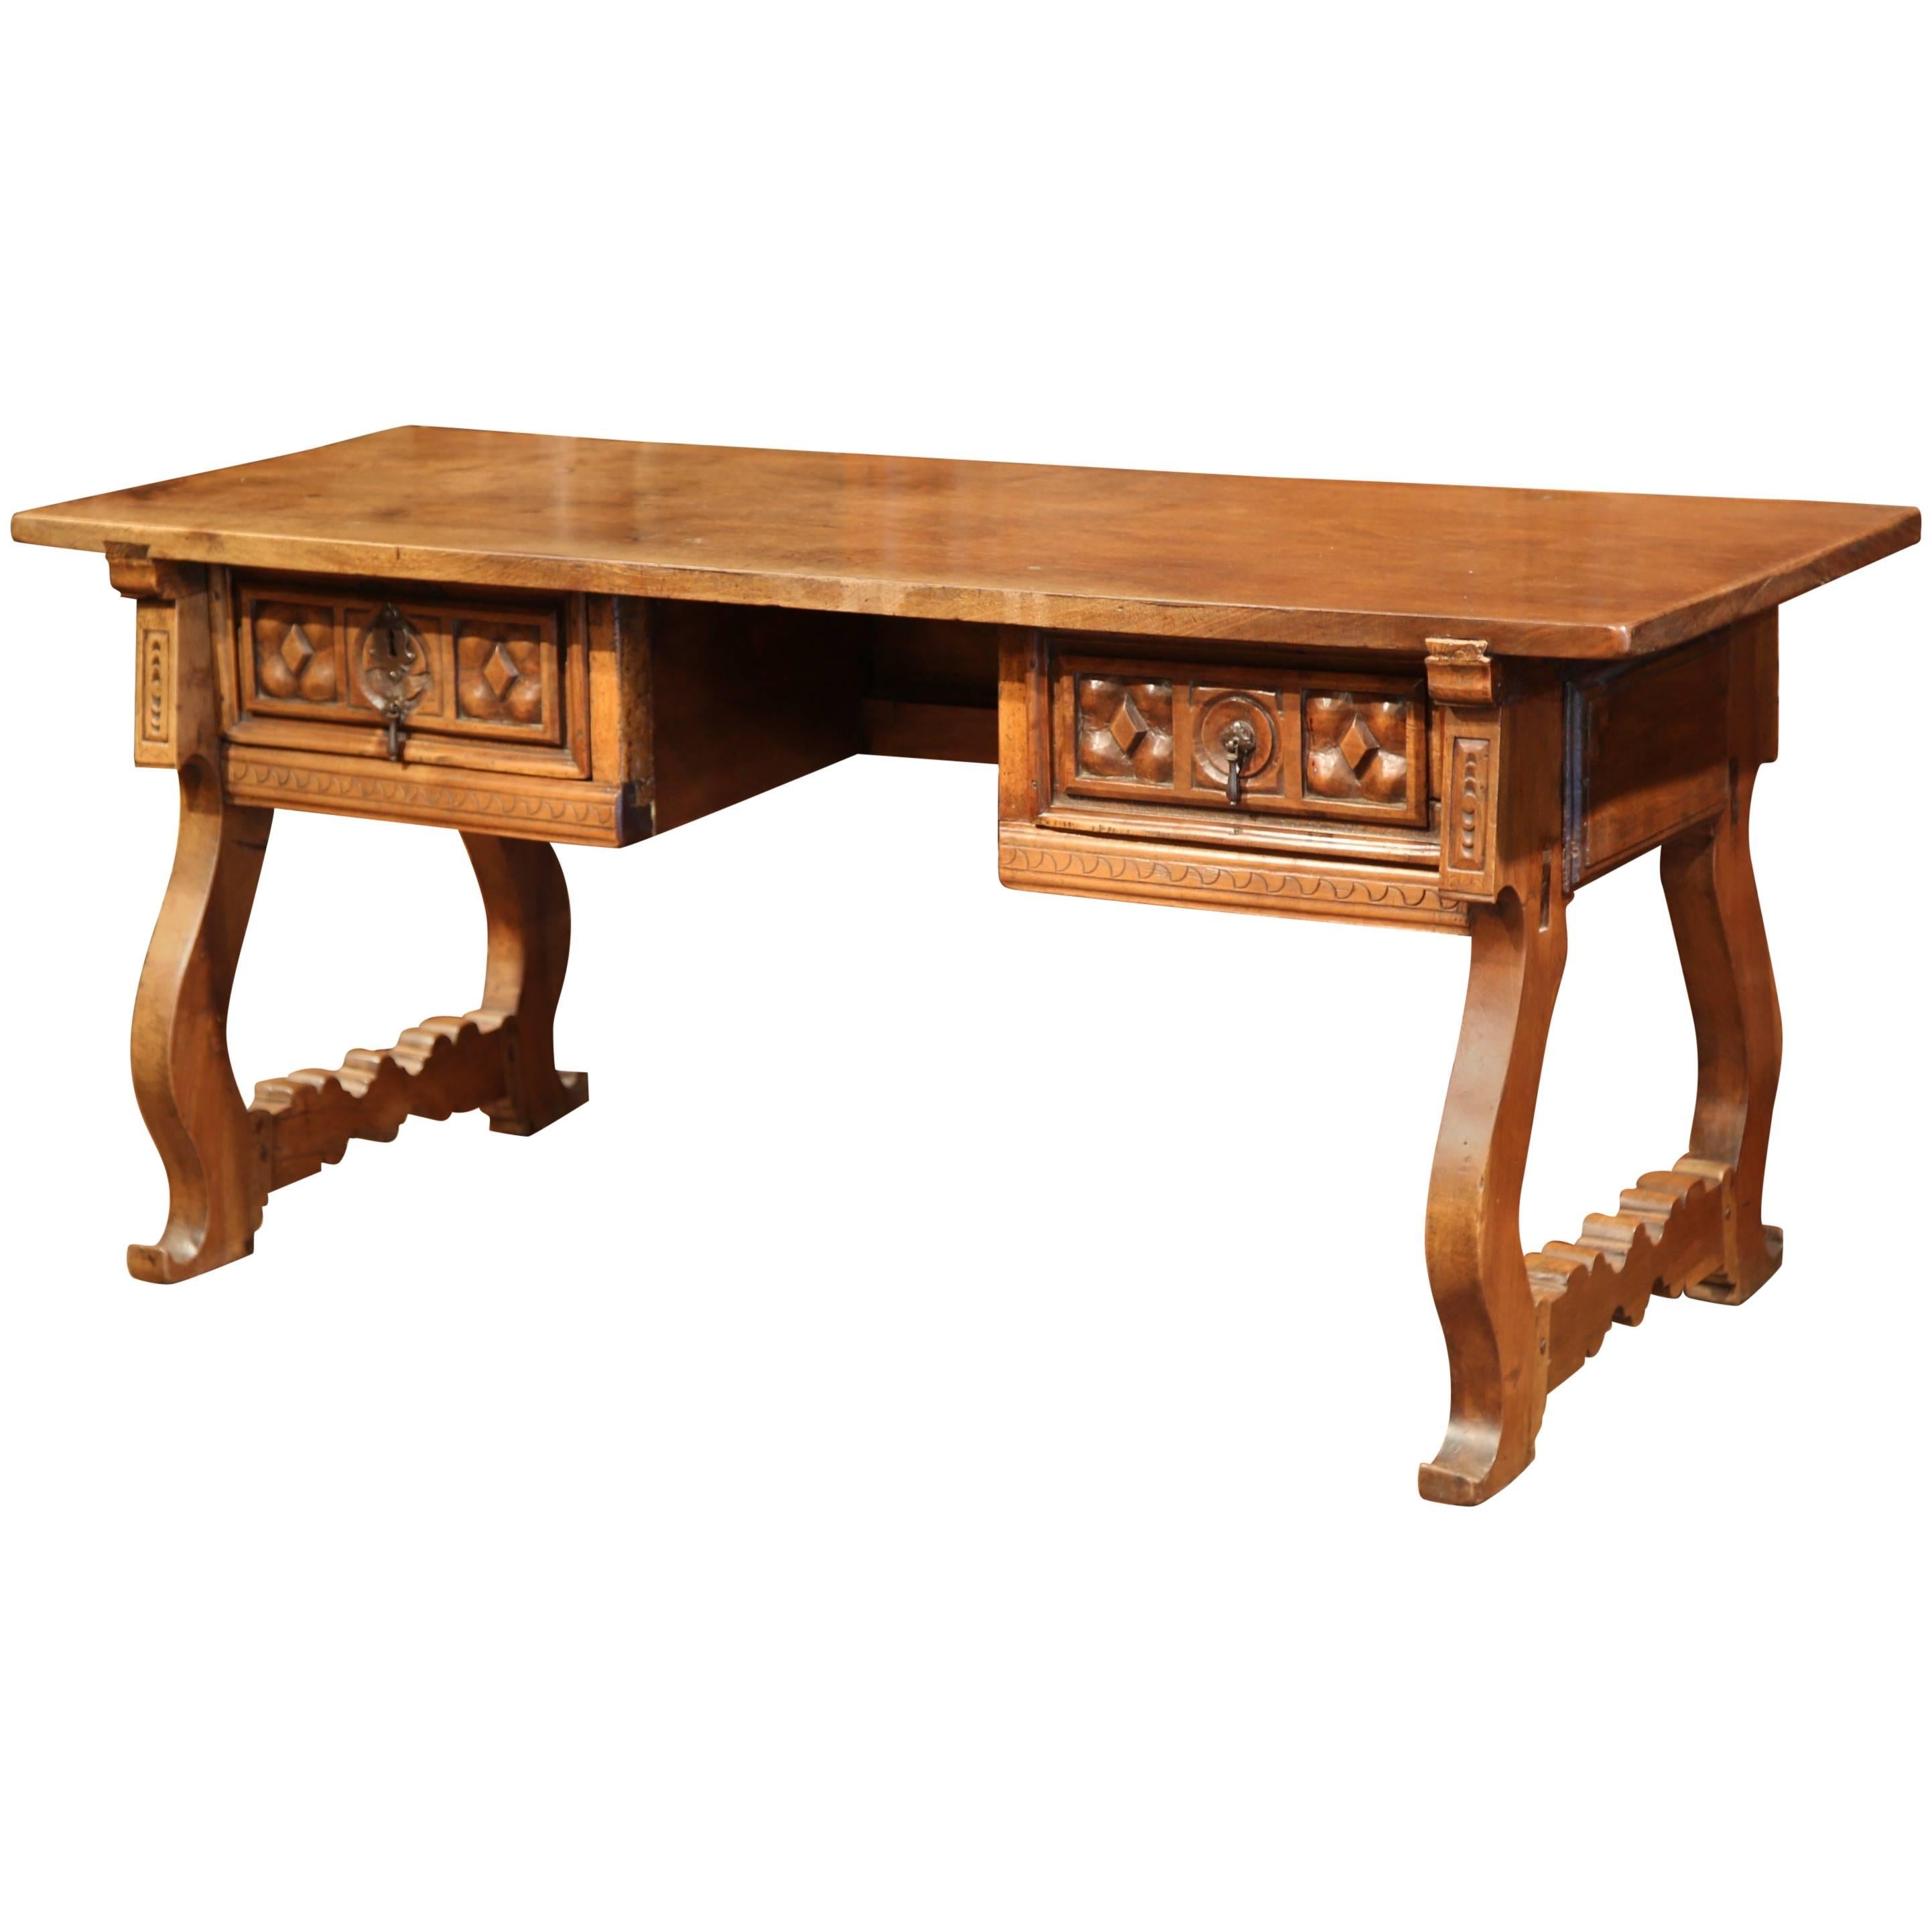 19th Century Spanish Carved Walnut Desk with Drawers and Single Plank Tabletop